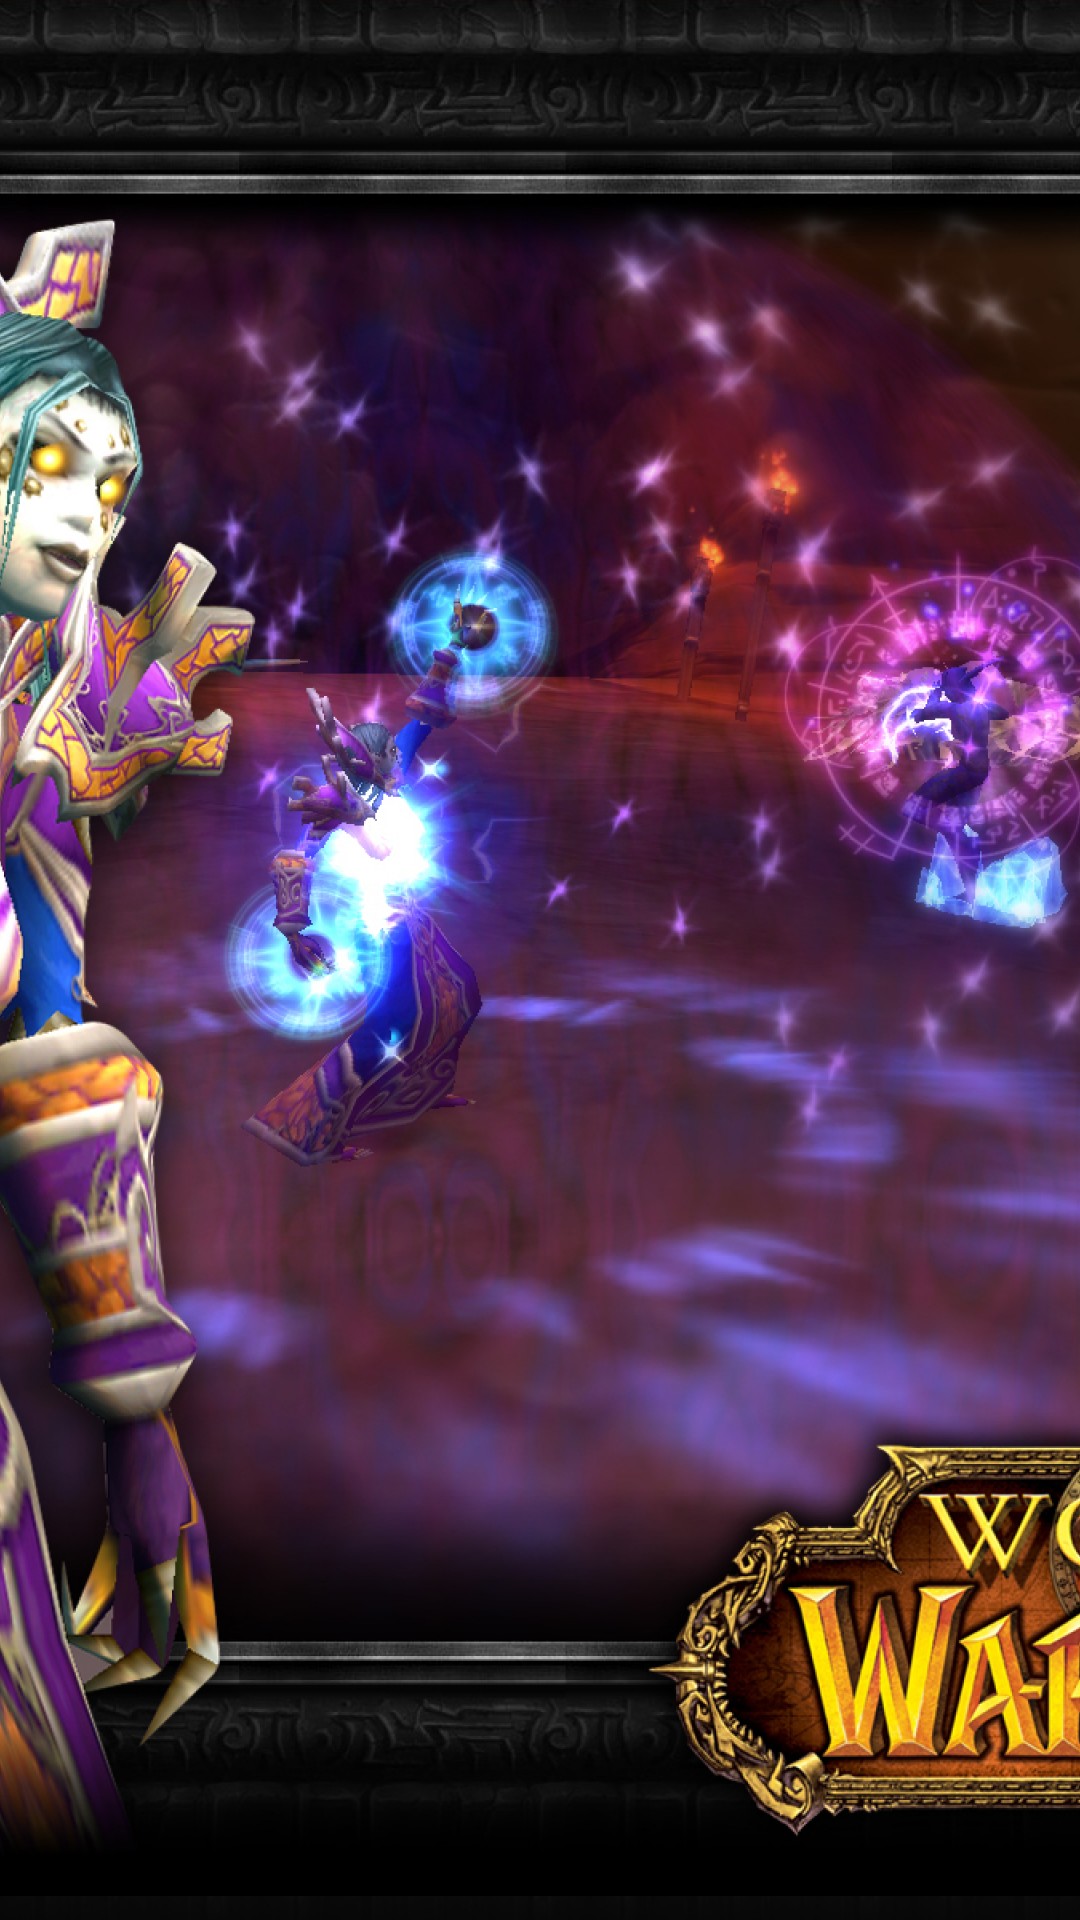 World Of Warcraft Wow Mage Hd Wallpaper For Desktop And